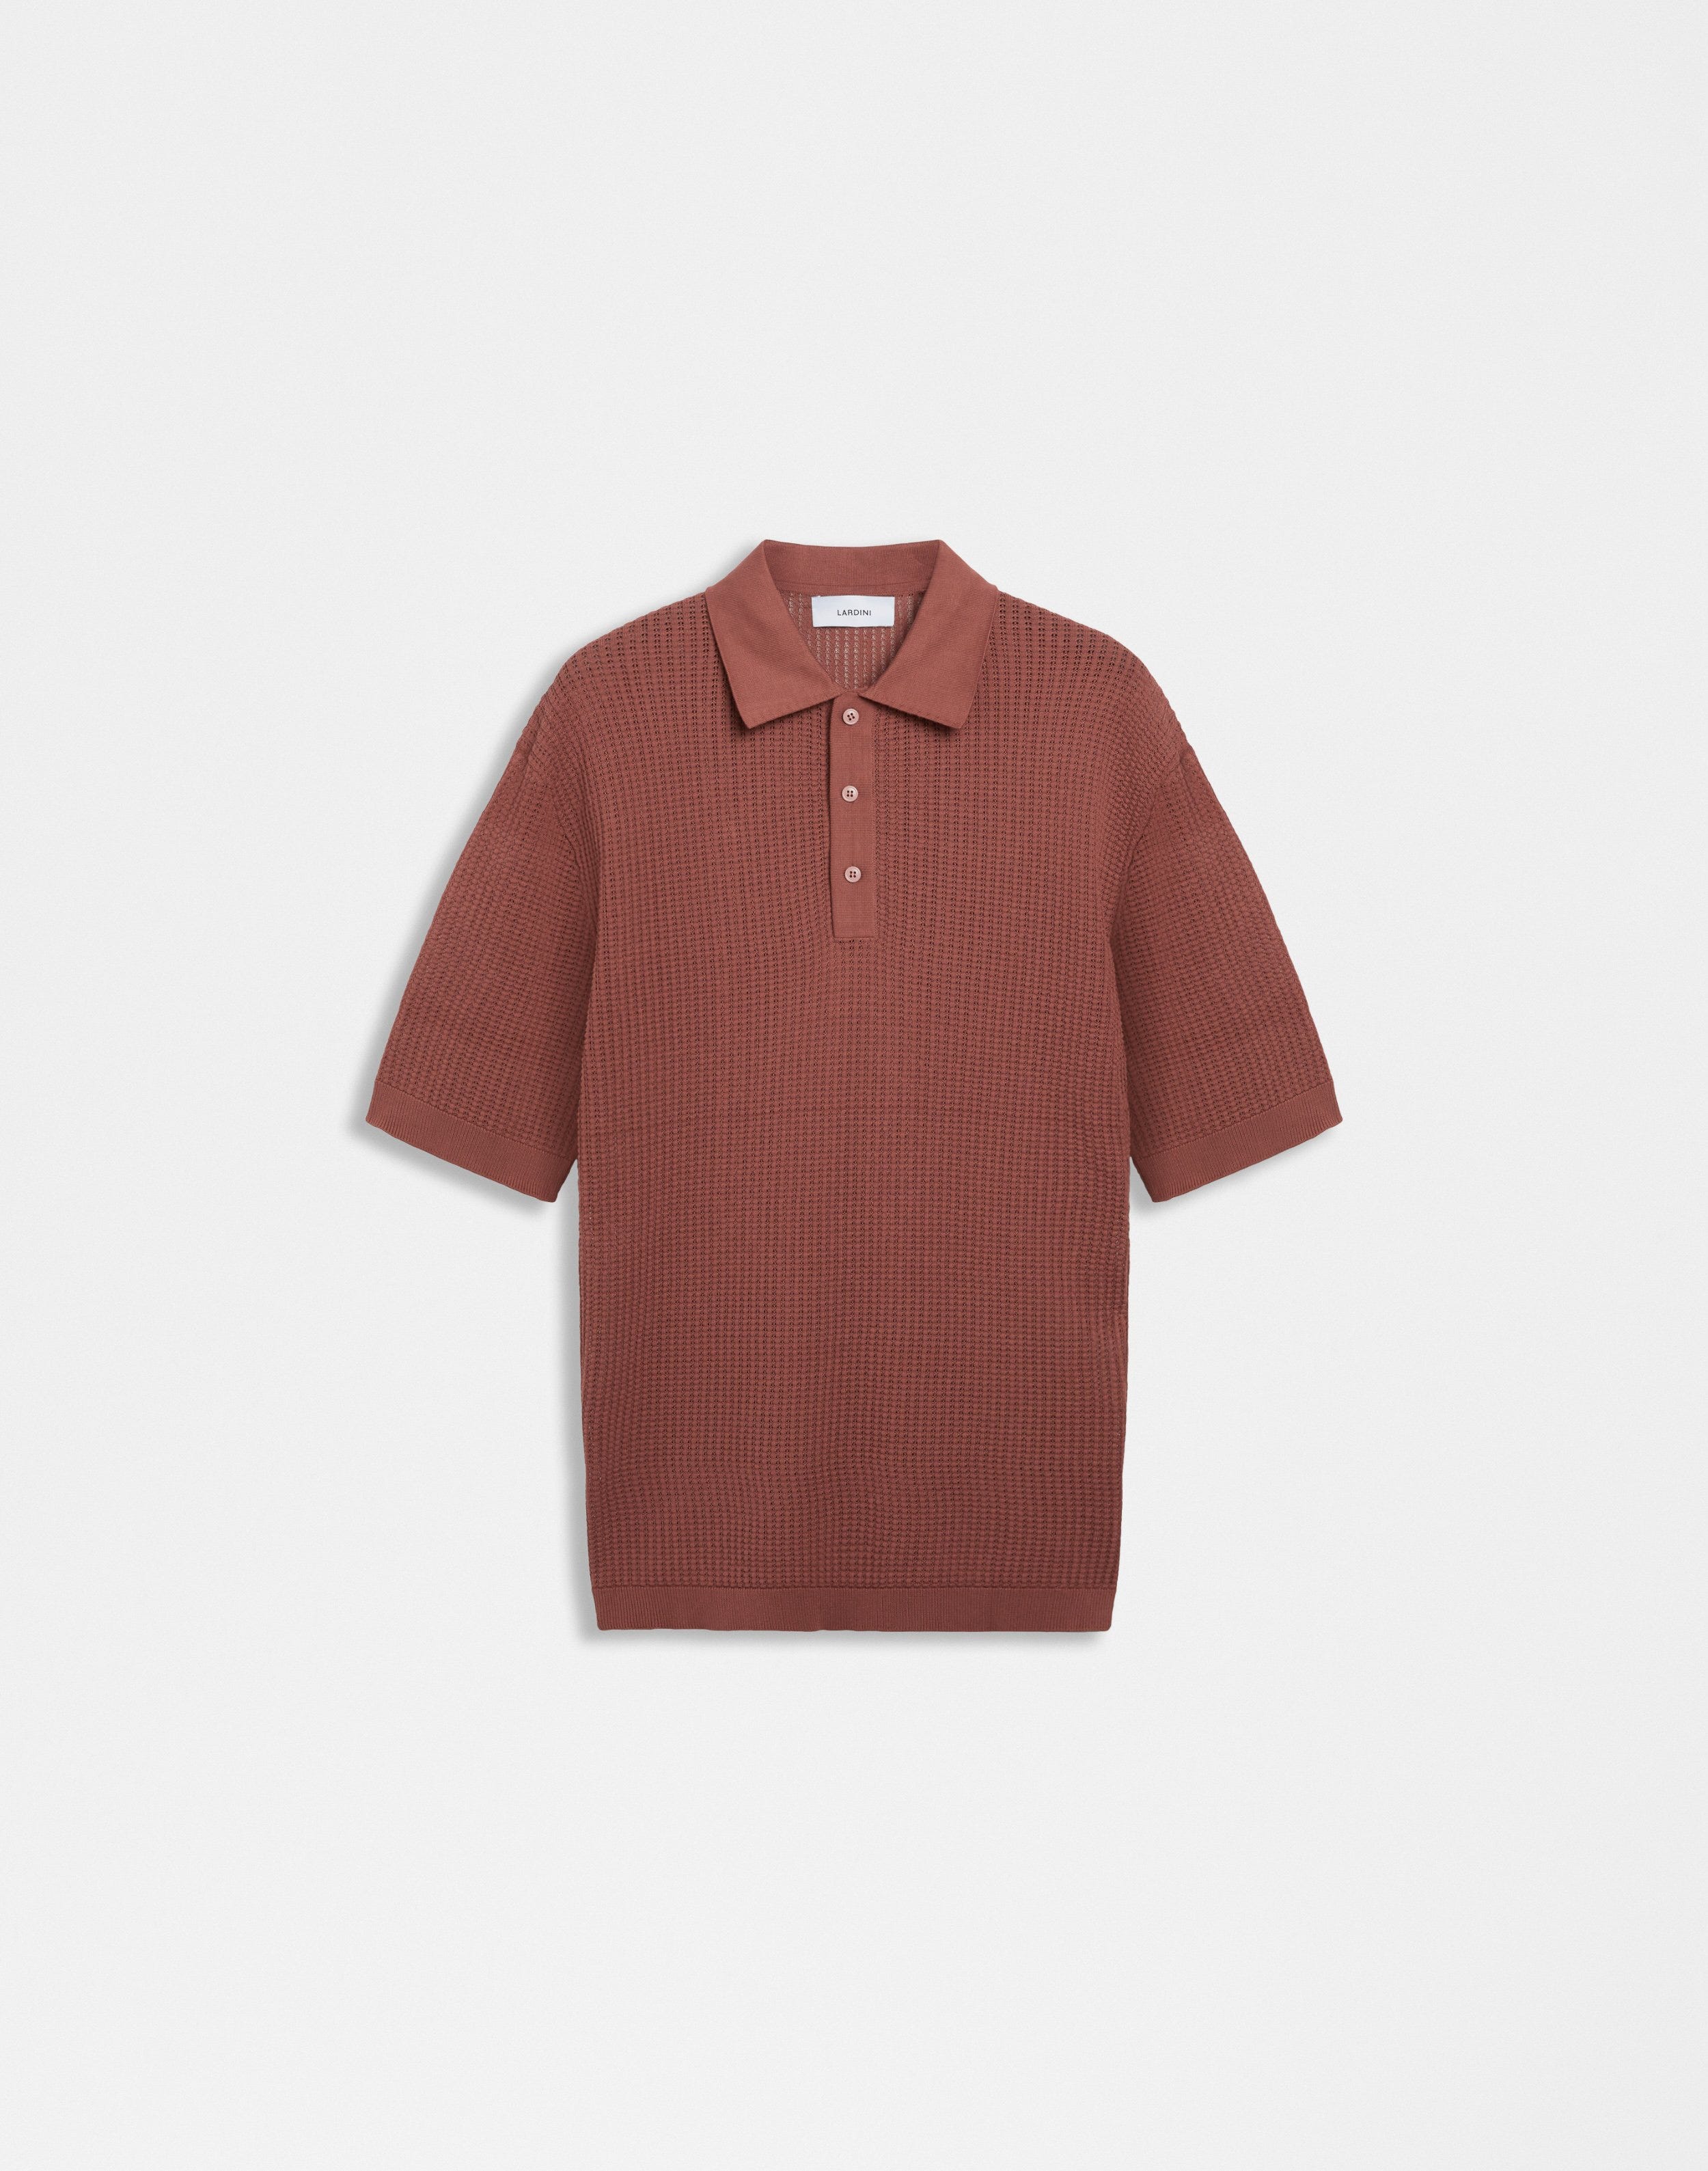 Red polo shirt with an openwork knit